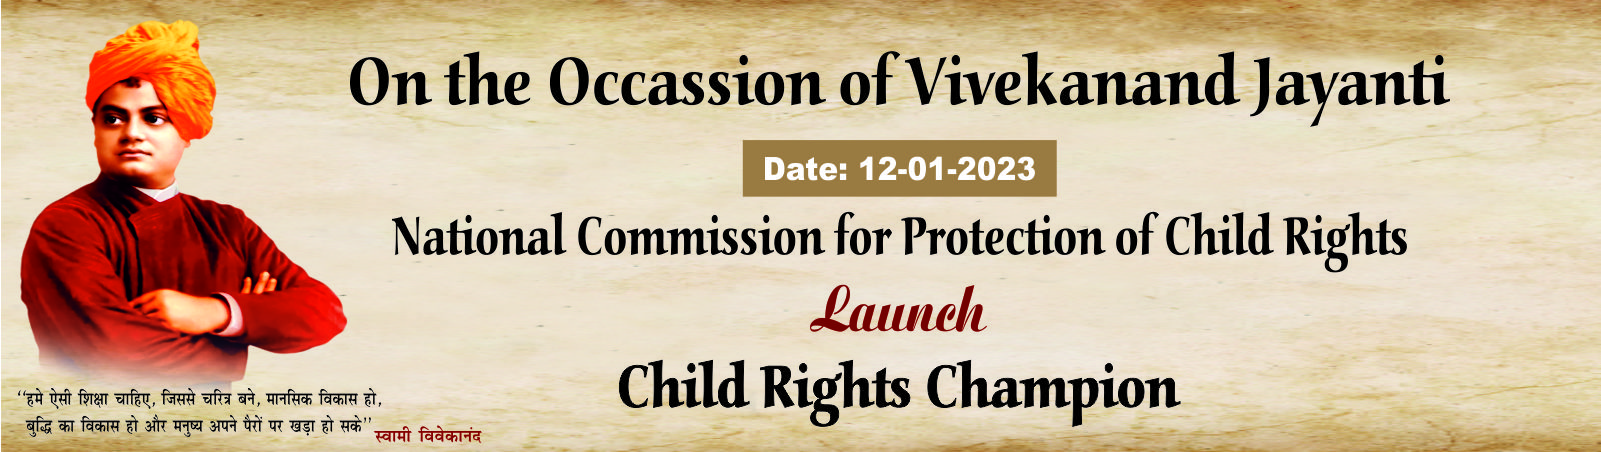 National Commission for Protection of Child Rights slider Image